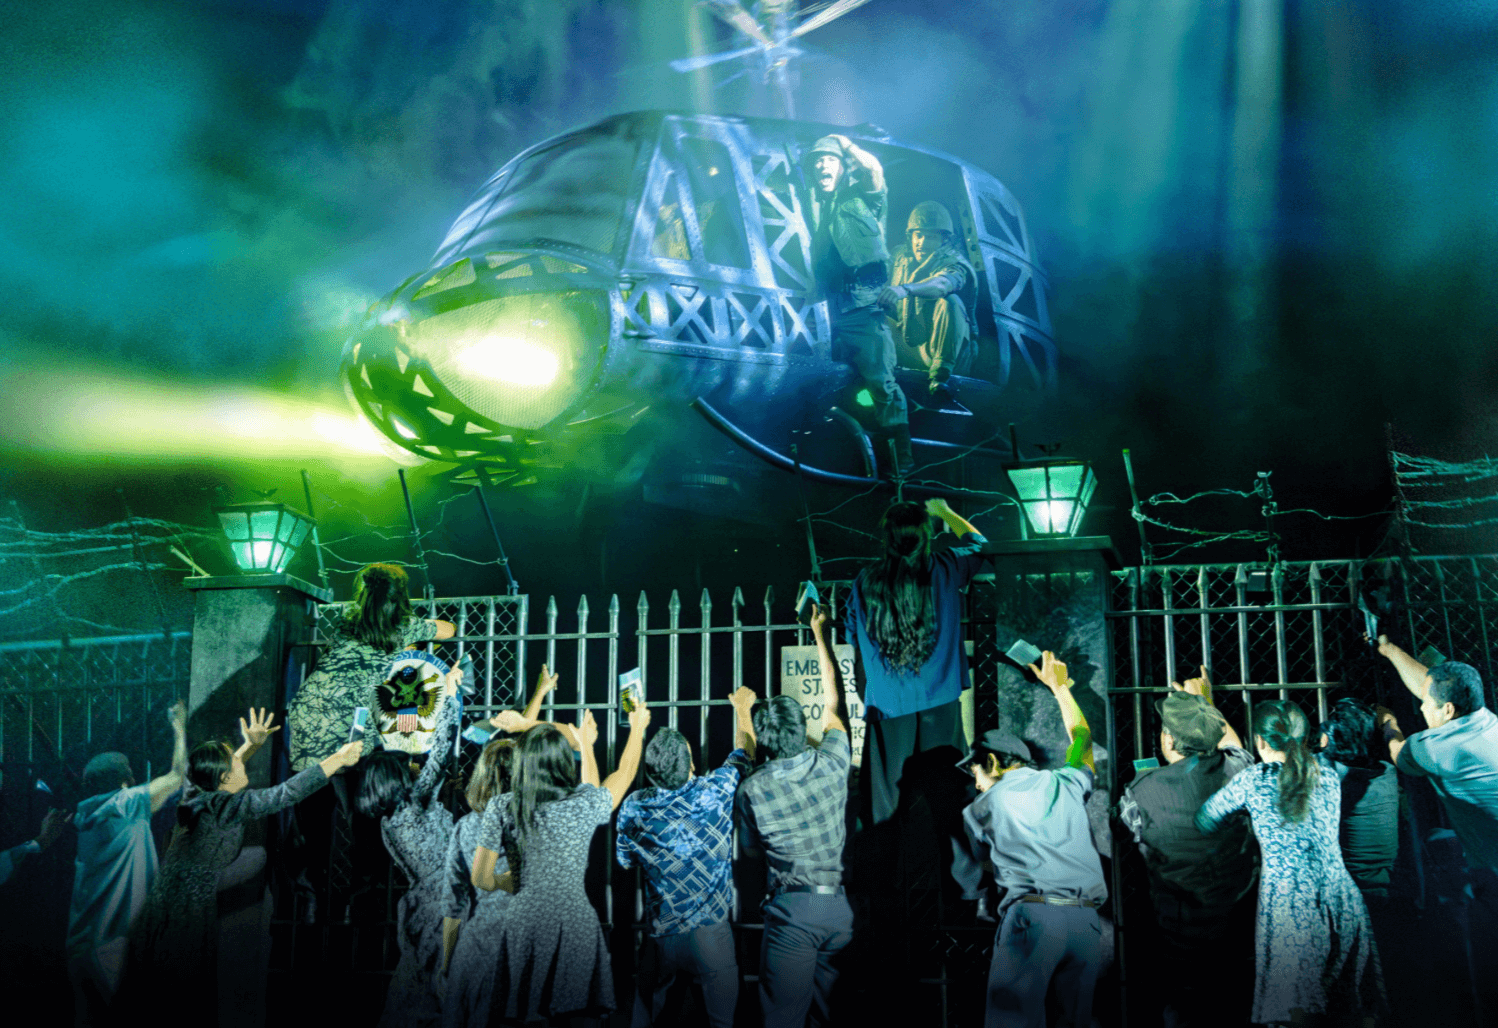 The famous helicopter scene in Miss Saigon’s Australian production